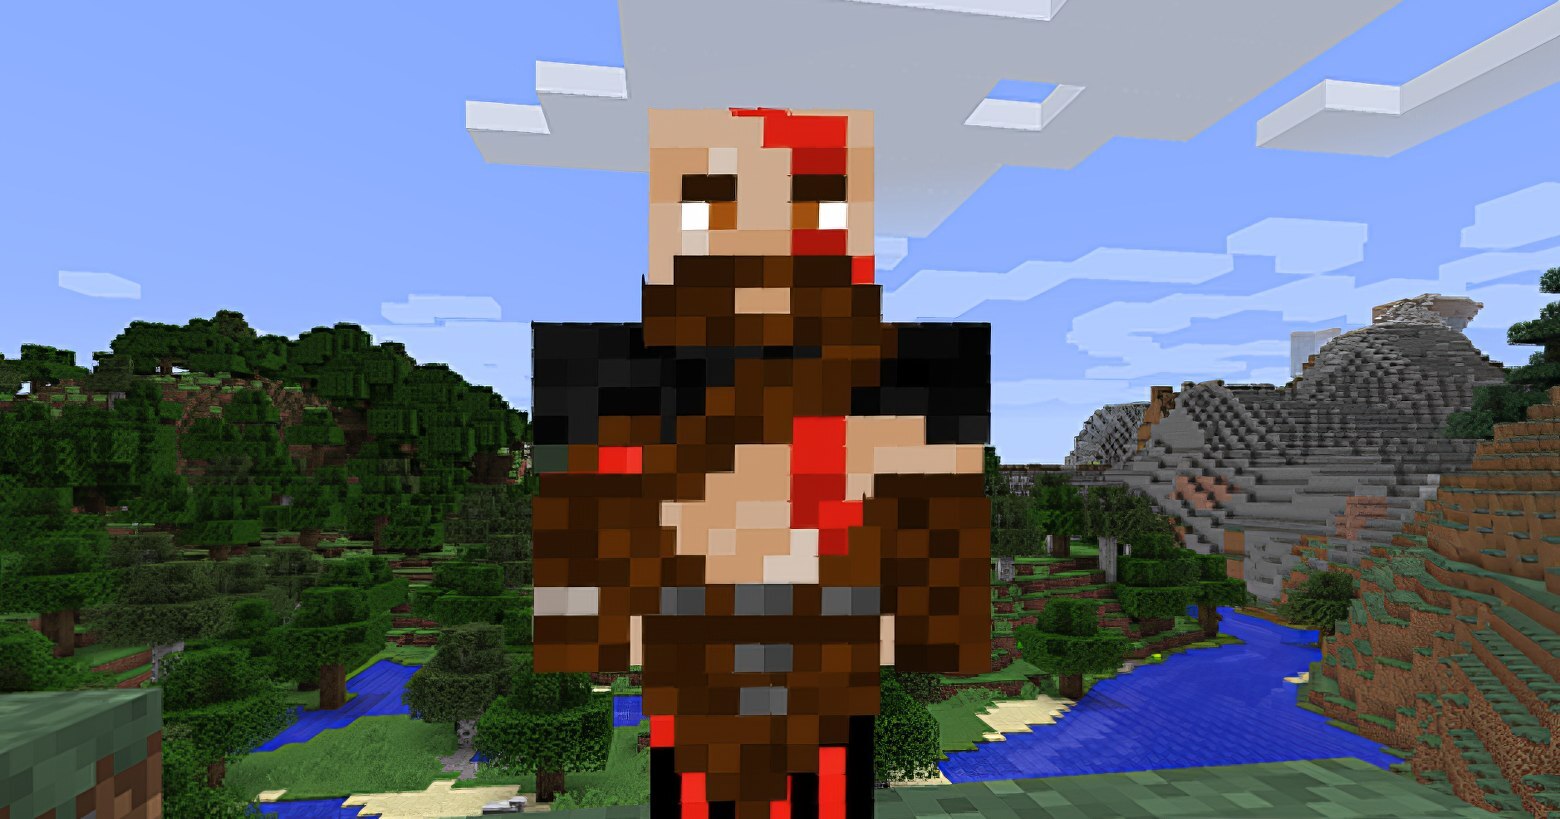 Use the God of War skin for Minecraft and gain respect in the pixel world. In this screenshot, you can see Kratos, the protagonist of the game "God of War Ragnarok", in pixel form in front of the typical world of Minecraft. He is shown in the center of the image in the half-total view in the foreground facing us and wears brown and red fur clothing. He has a shaved head with red war paint on it. In the background, we glimpse numerous pixelated hills. On the left side, a large section of forest is depicted running over a widely stretching hill, and on the right, a brown-earth and stone hill landscape is depicted. In the center is a valley with a blue lake meandering along it. The blue sky with numerous square clouds occupies the upper half of the picture.